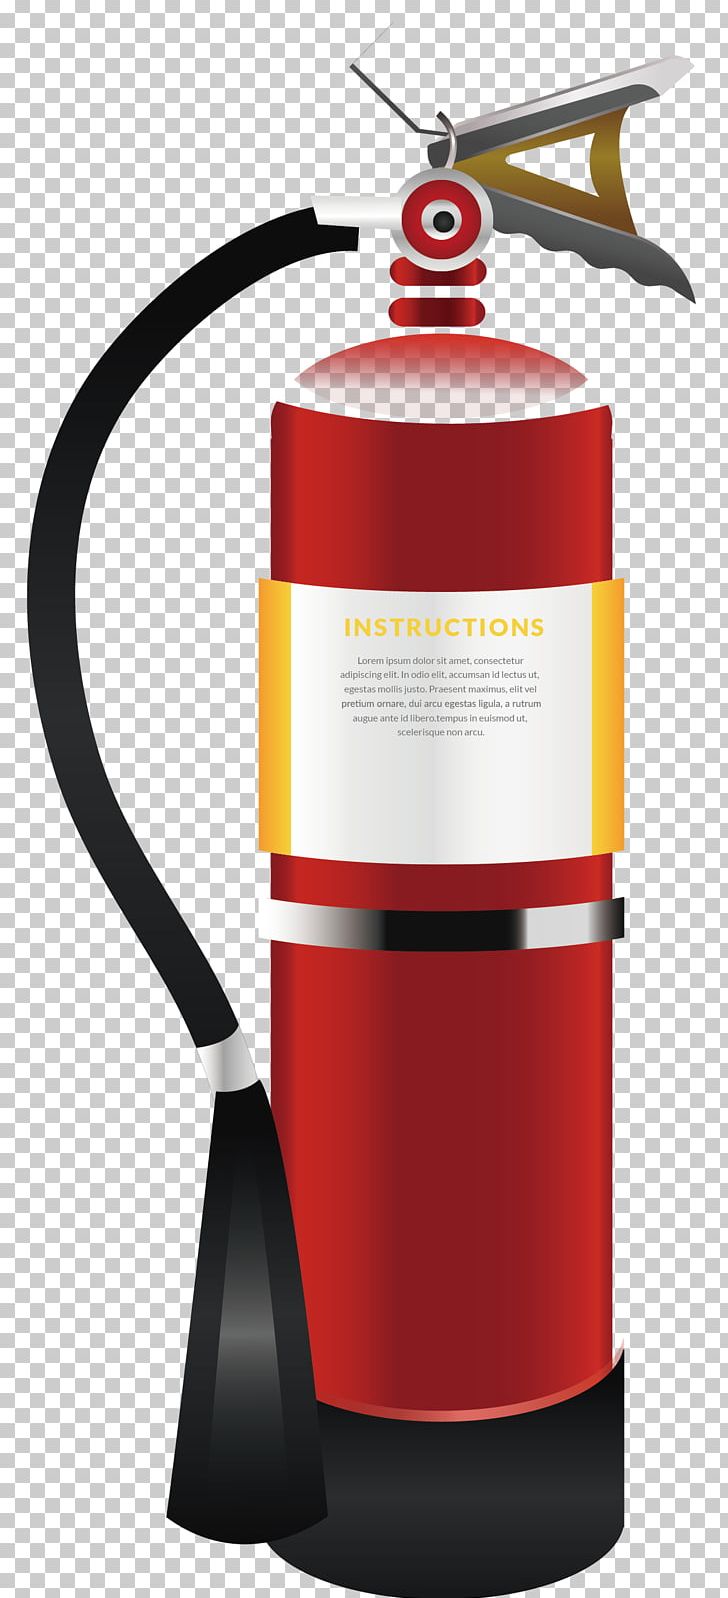 Fire Extinguisher Conflagration PNG, Clipart, Christmas Decoration, Conflagration, Cylinder, Decor, Decoration Free PNG Download